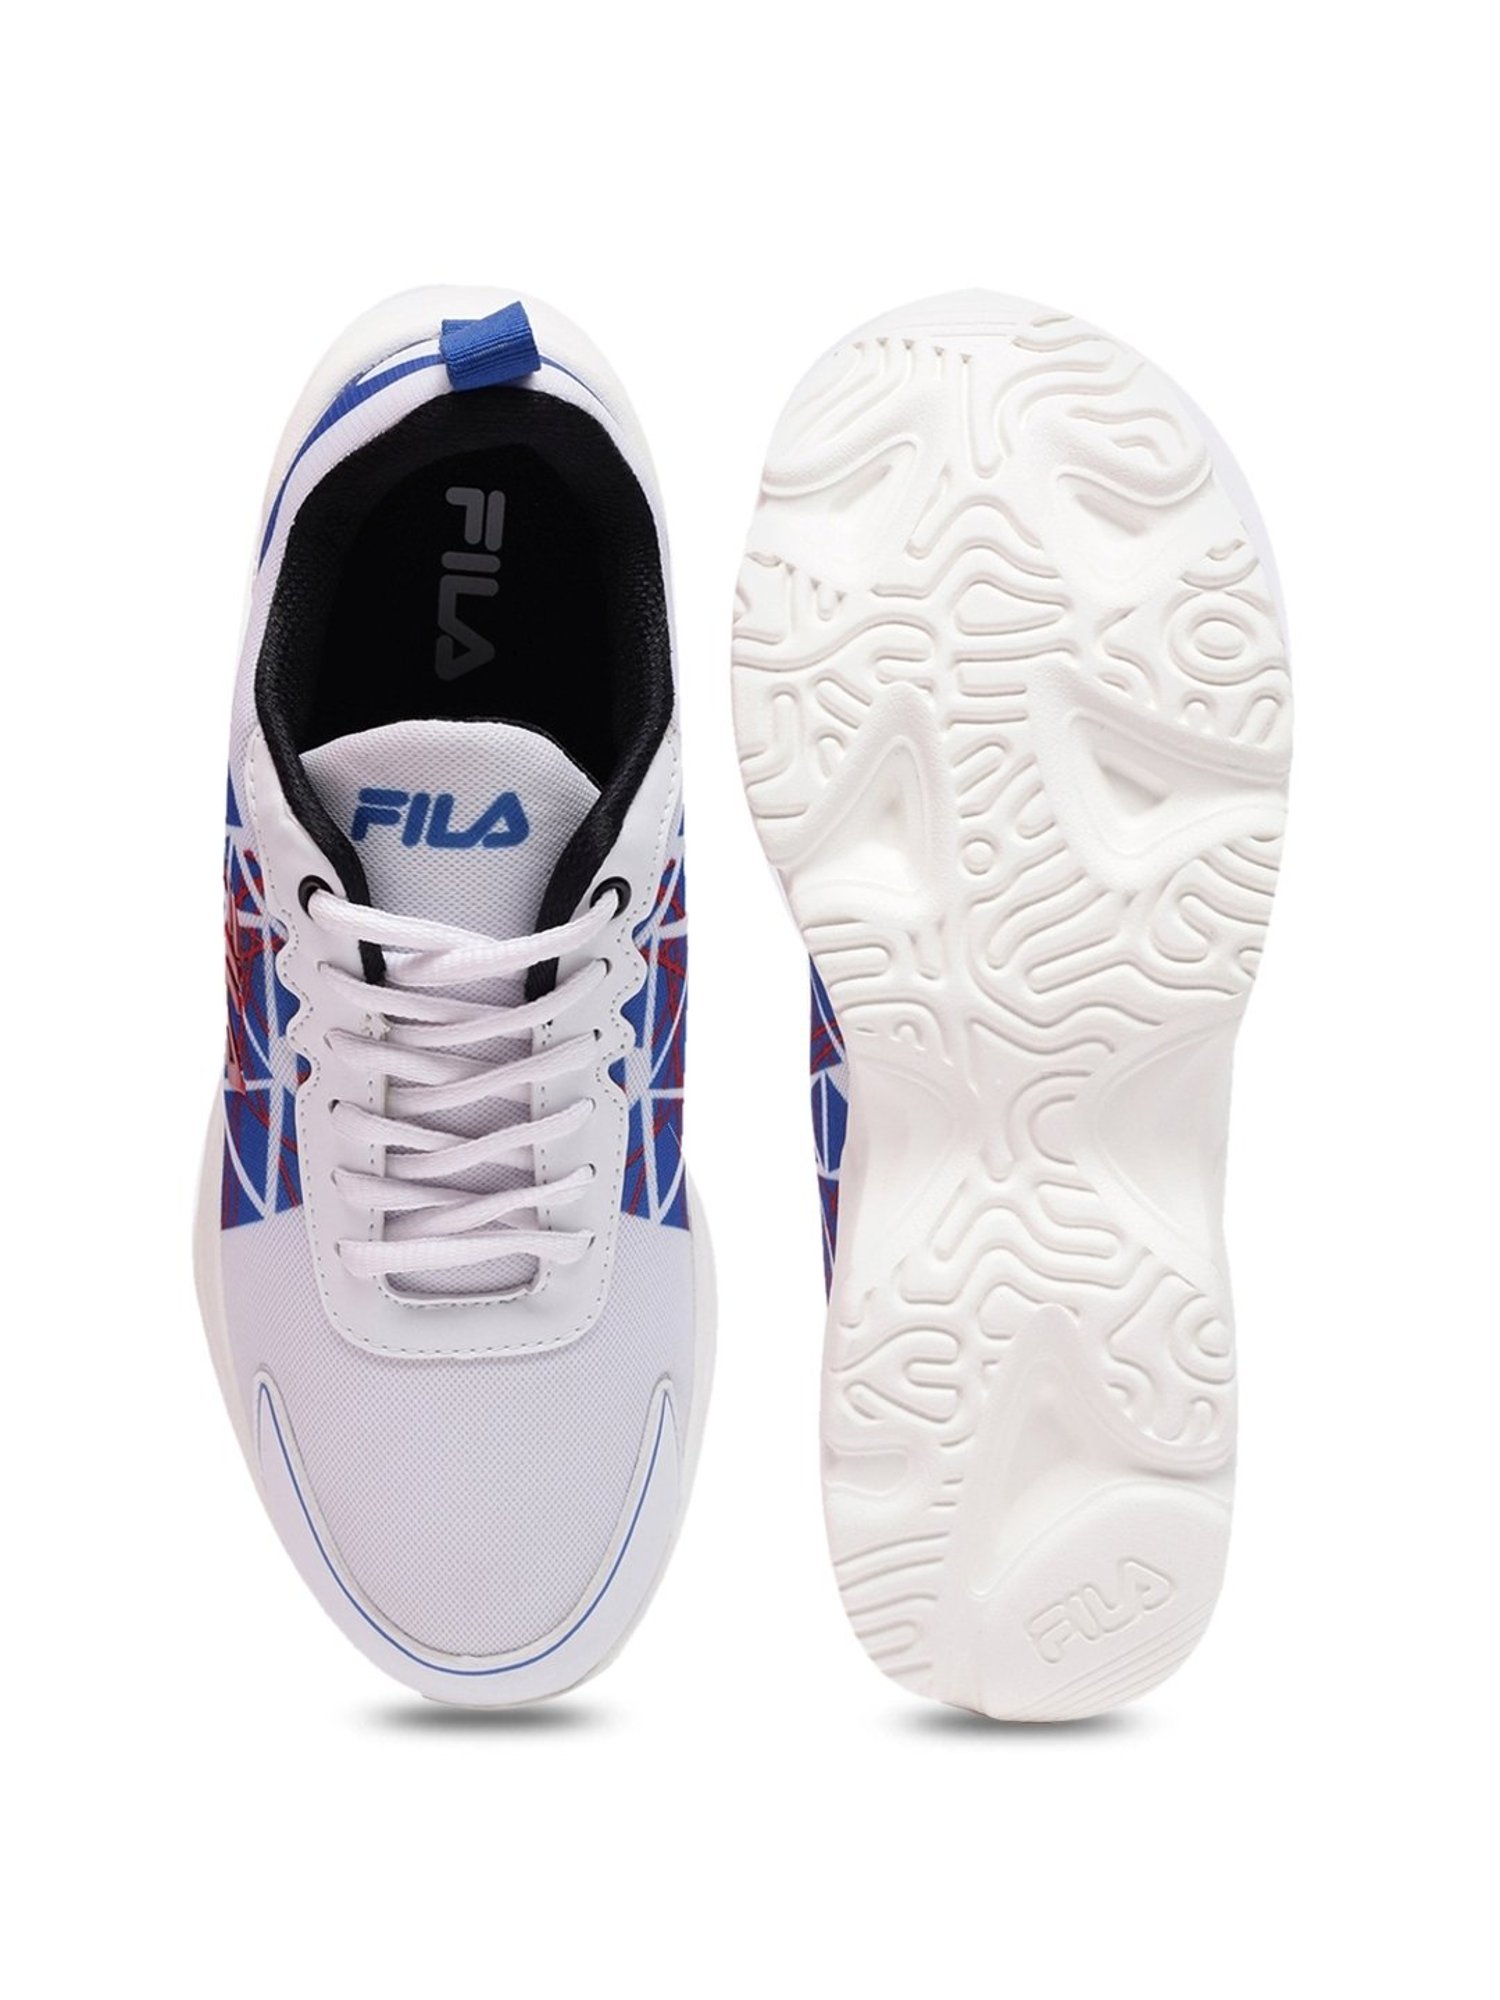 FILA Casual Men's Shoes White Colour in Dandeli at best price by G D  Enterprises - Justdial